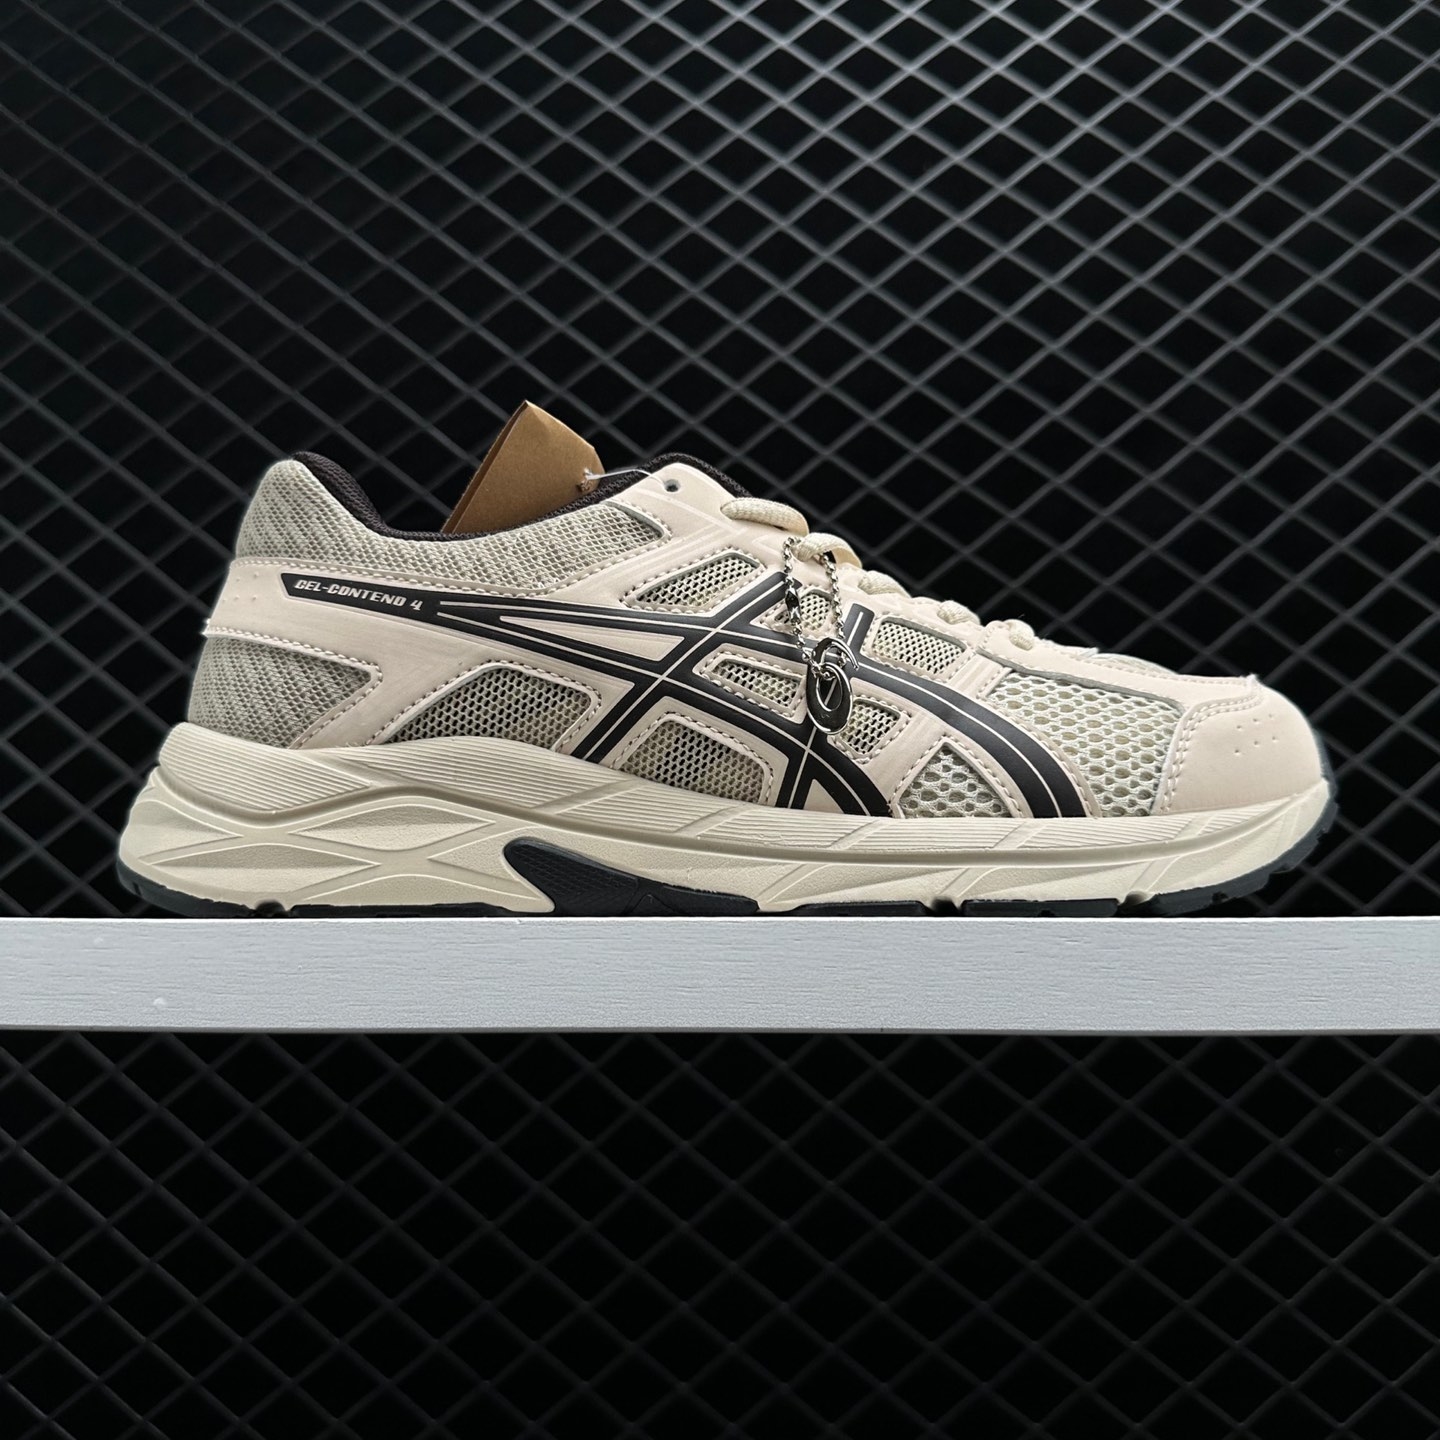 Asics Gel-Contend 4 Creamwhite Black T8D9Q-112 - Stylish and Supportive Running Shoes